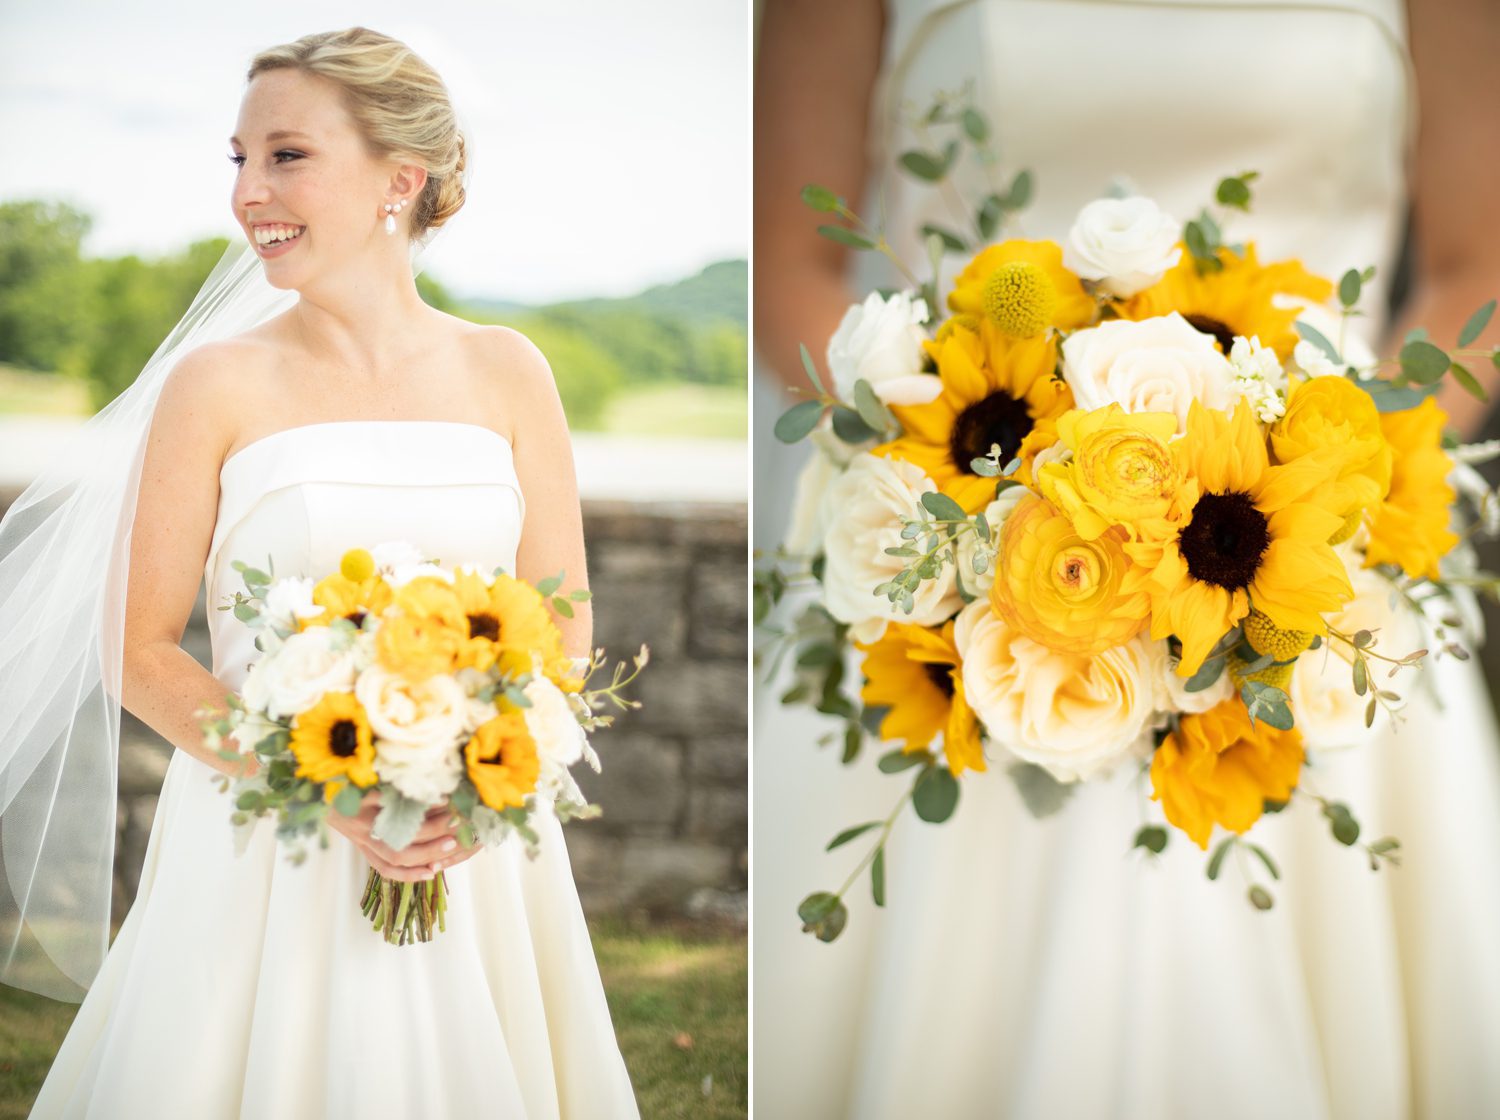 Old Natchez Country Club Wedding in Franklin, TN Bridal Bouquet Summer White and Yellow with Sunflowers & Ranunculus